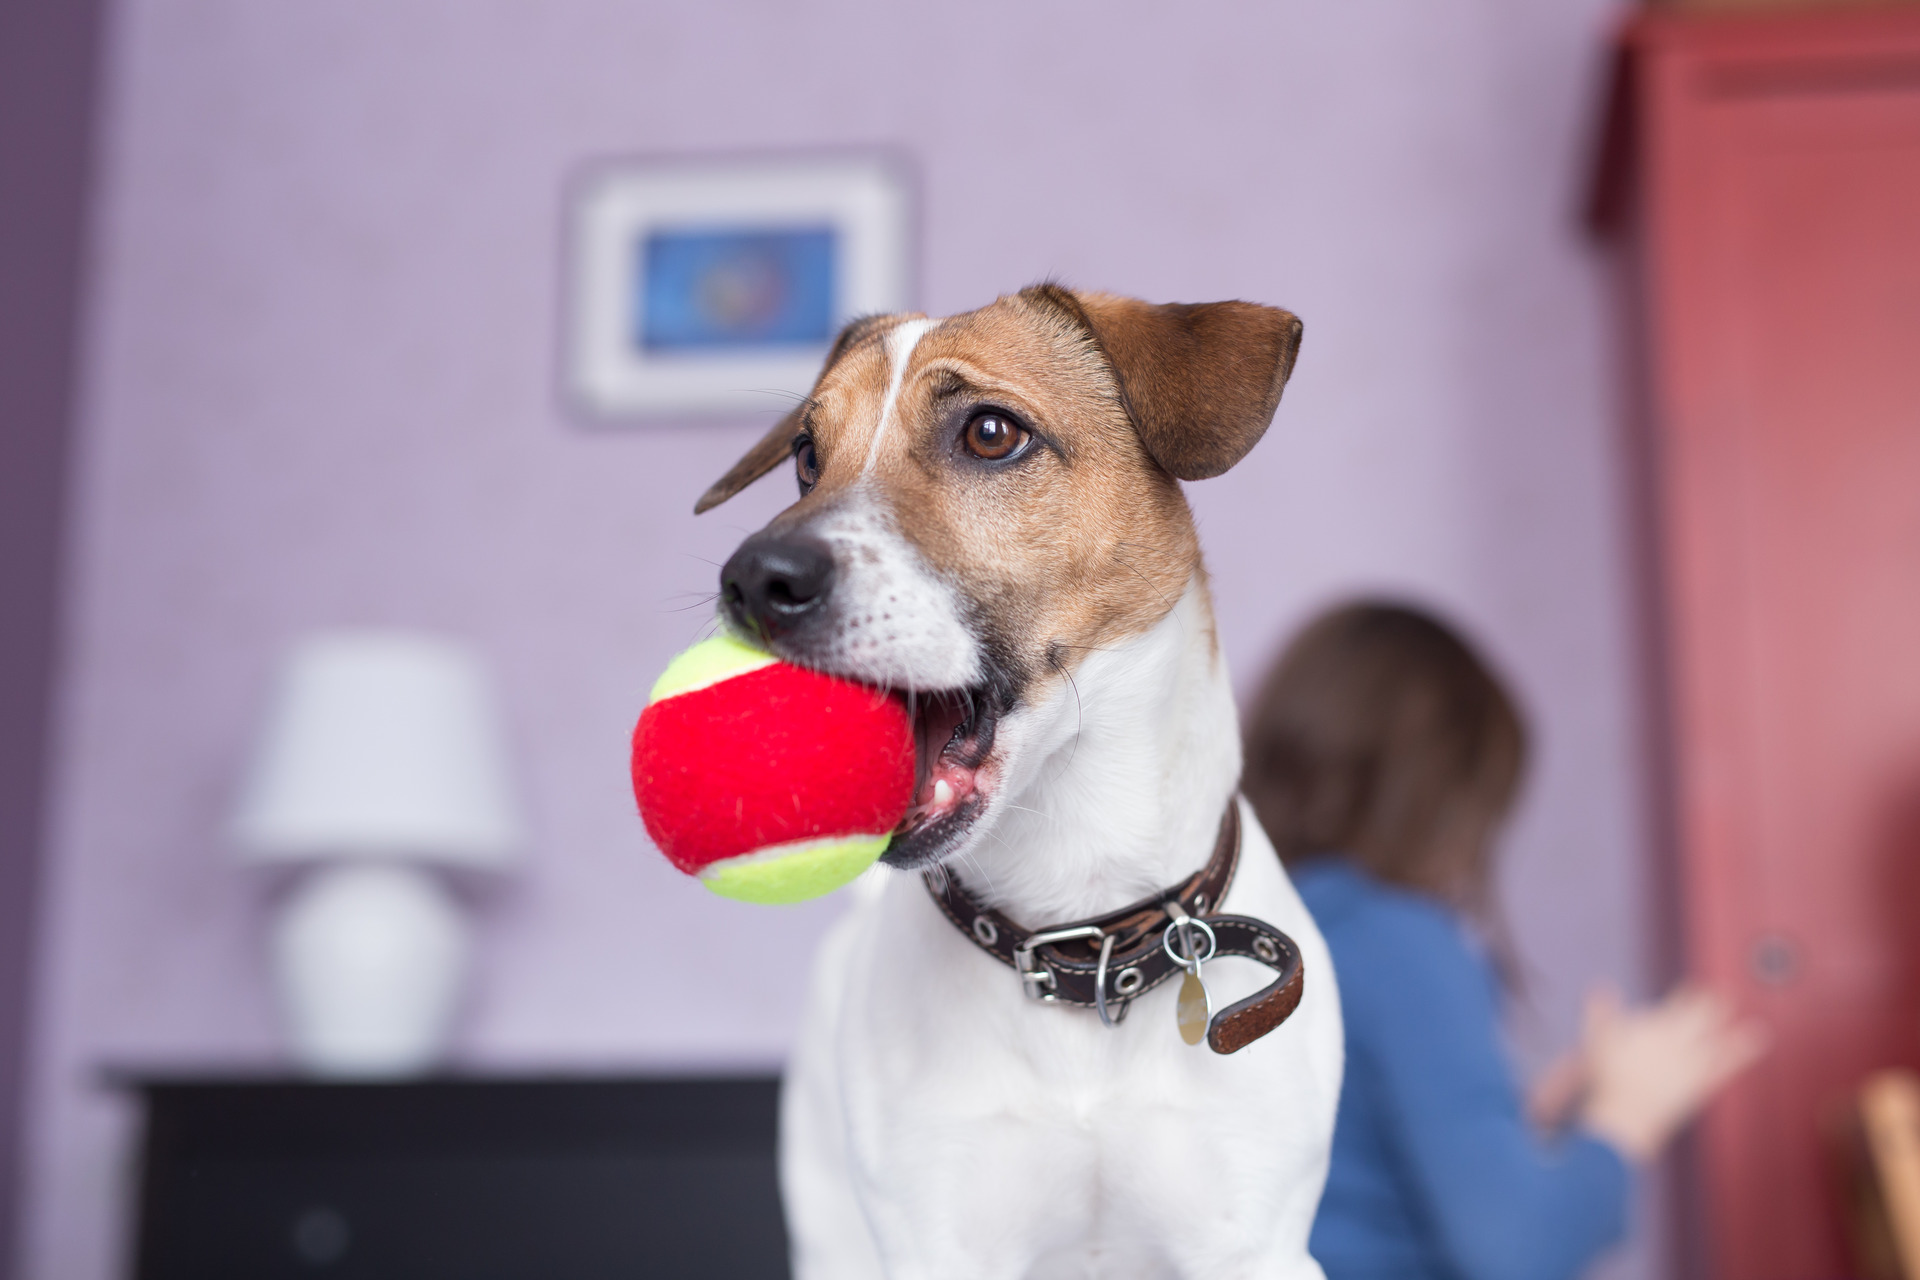 A dog holding a ball in their mouth